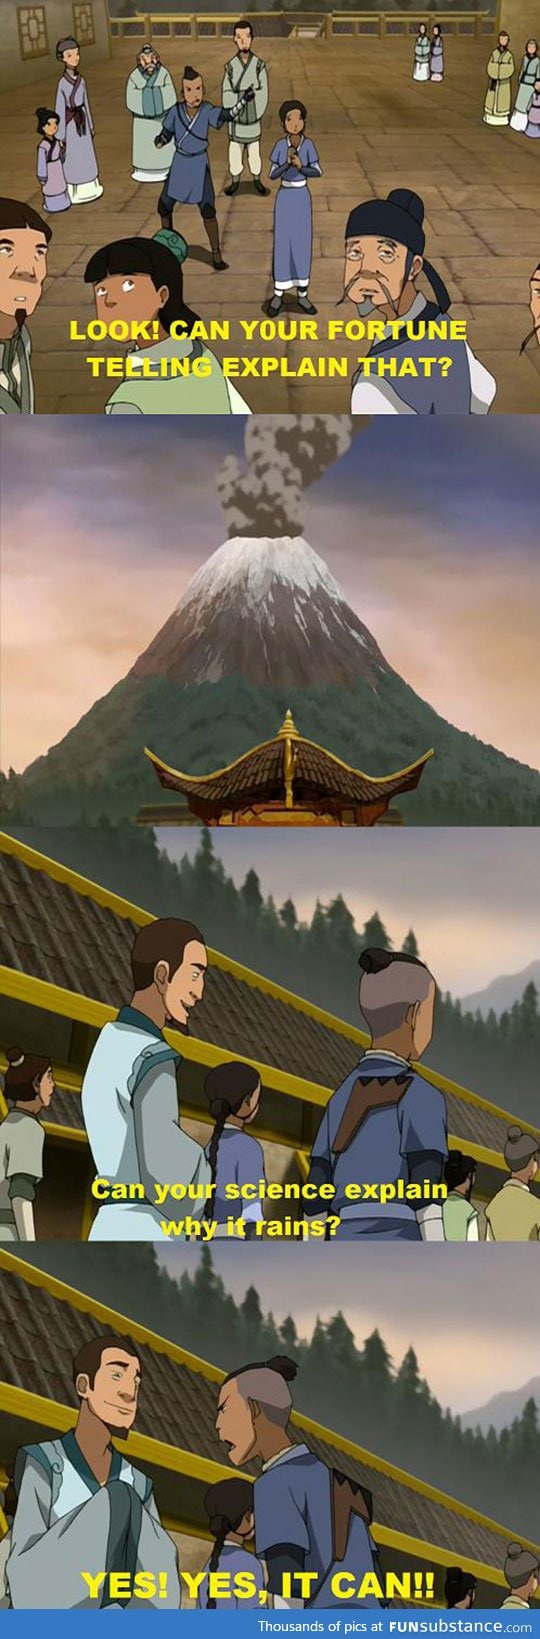 Avatar had its priceless moments